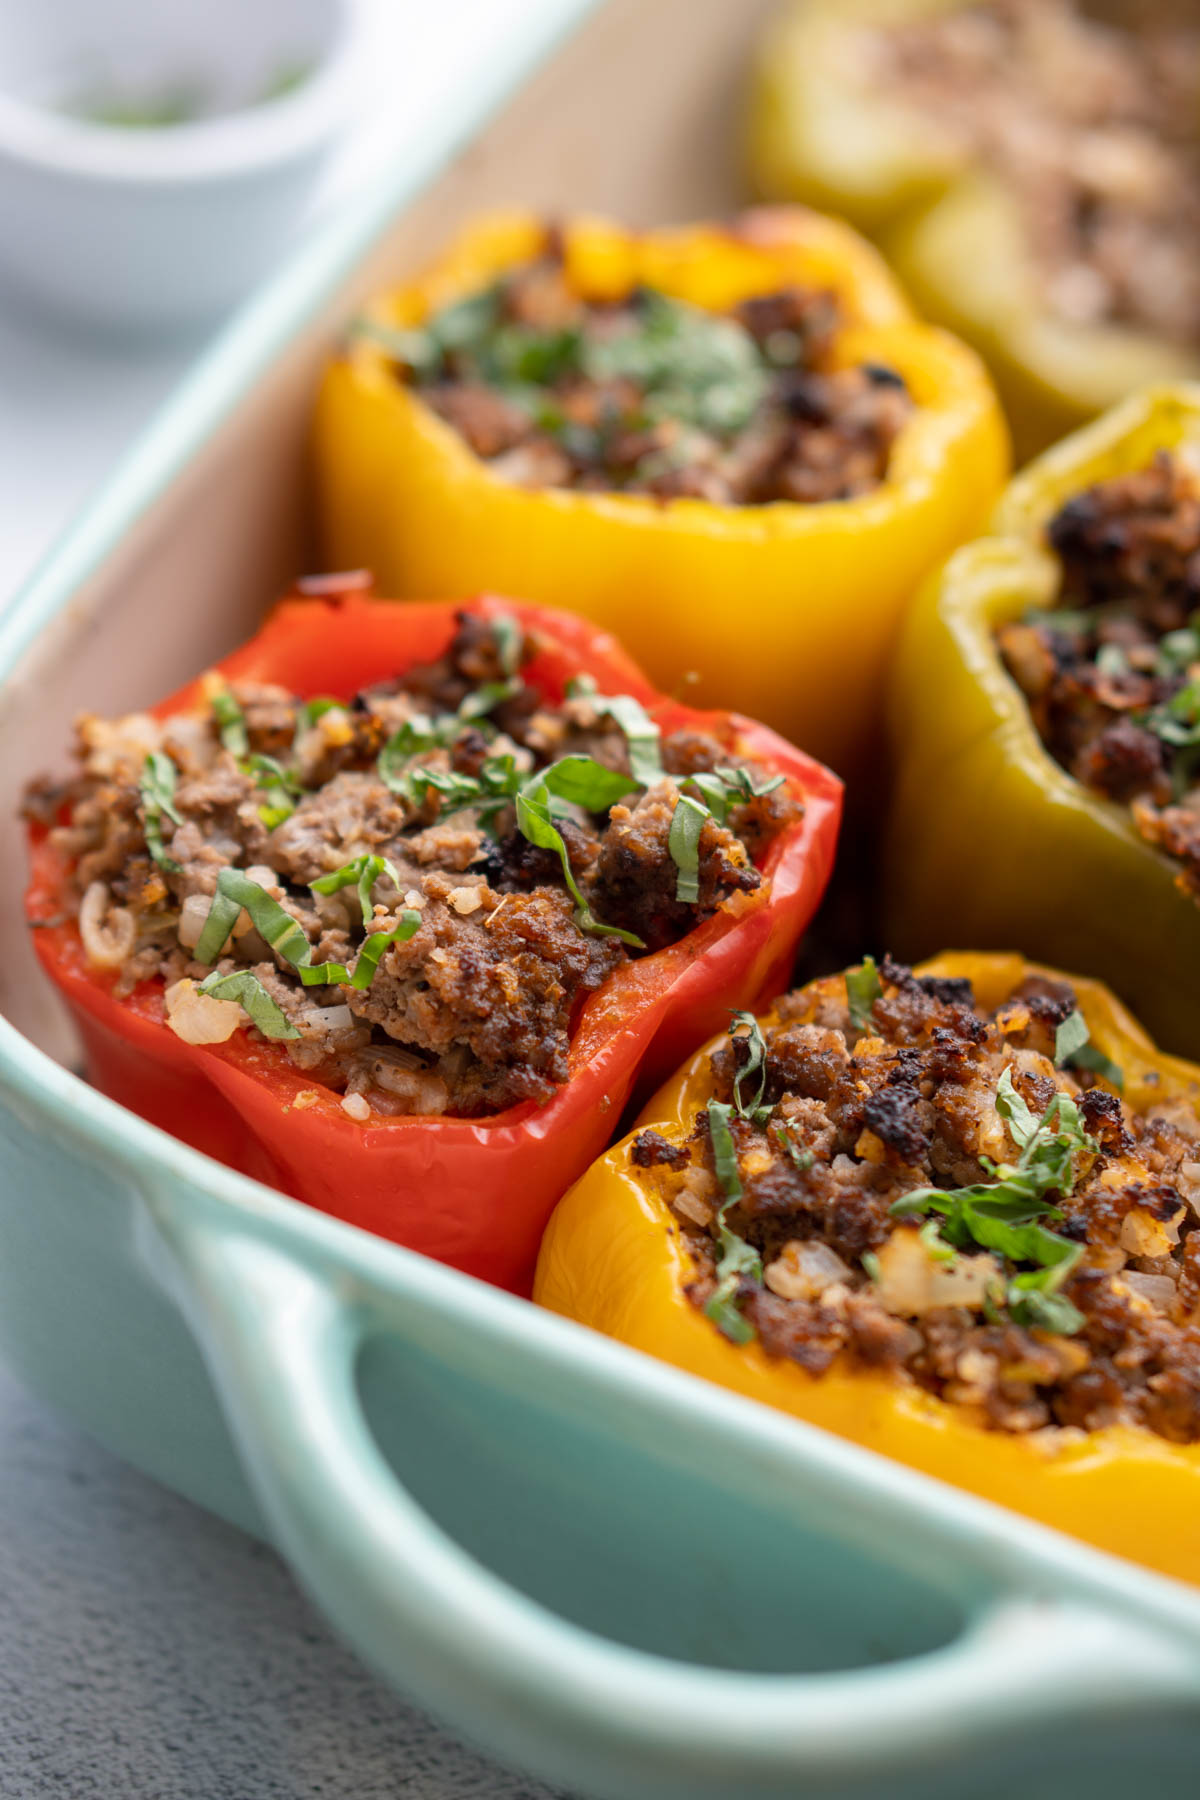 Bell peppers stuffed with ground beef mixture in casserole dish garnished with fresh basil.